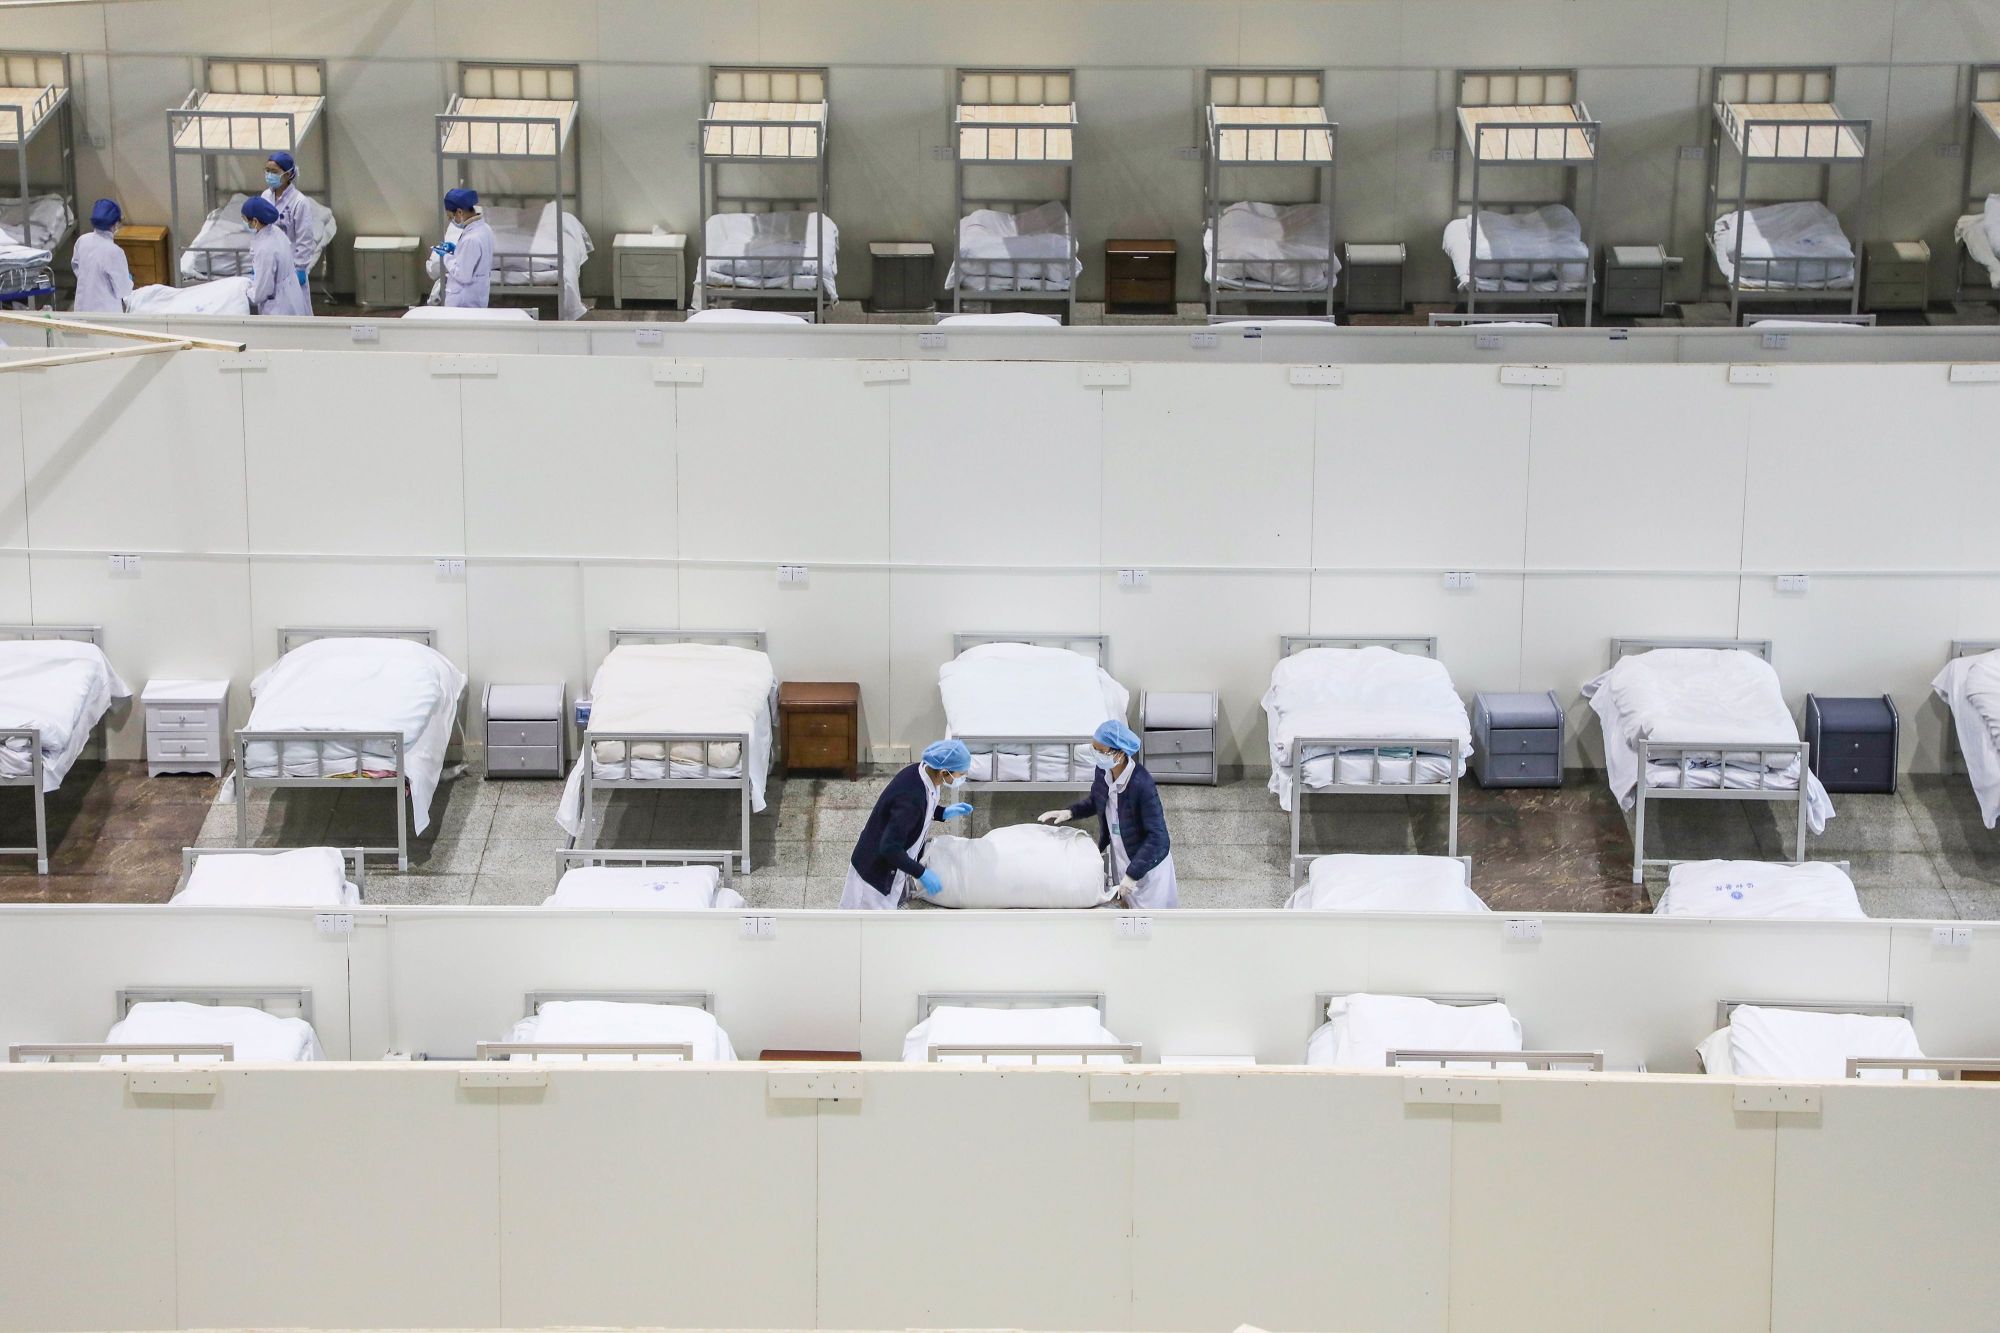 Staff members set up beds for patients displaying mild symptoms of the novel coronavirus infection at an exhibition center that has been converted into a hospital in Wuhan, China, on Thursday. | AFP-JIJI